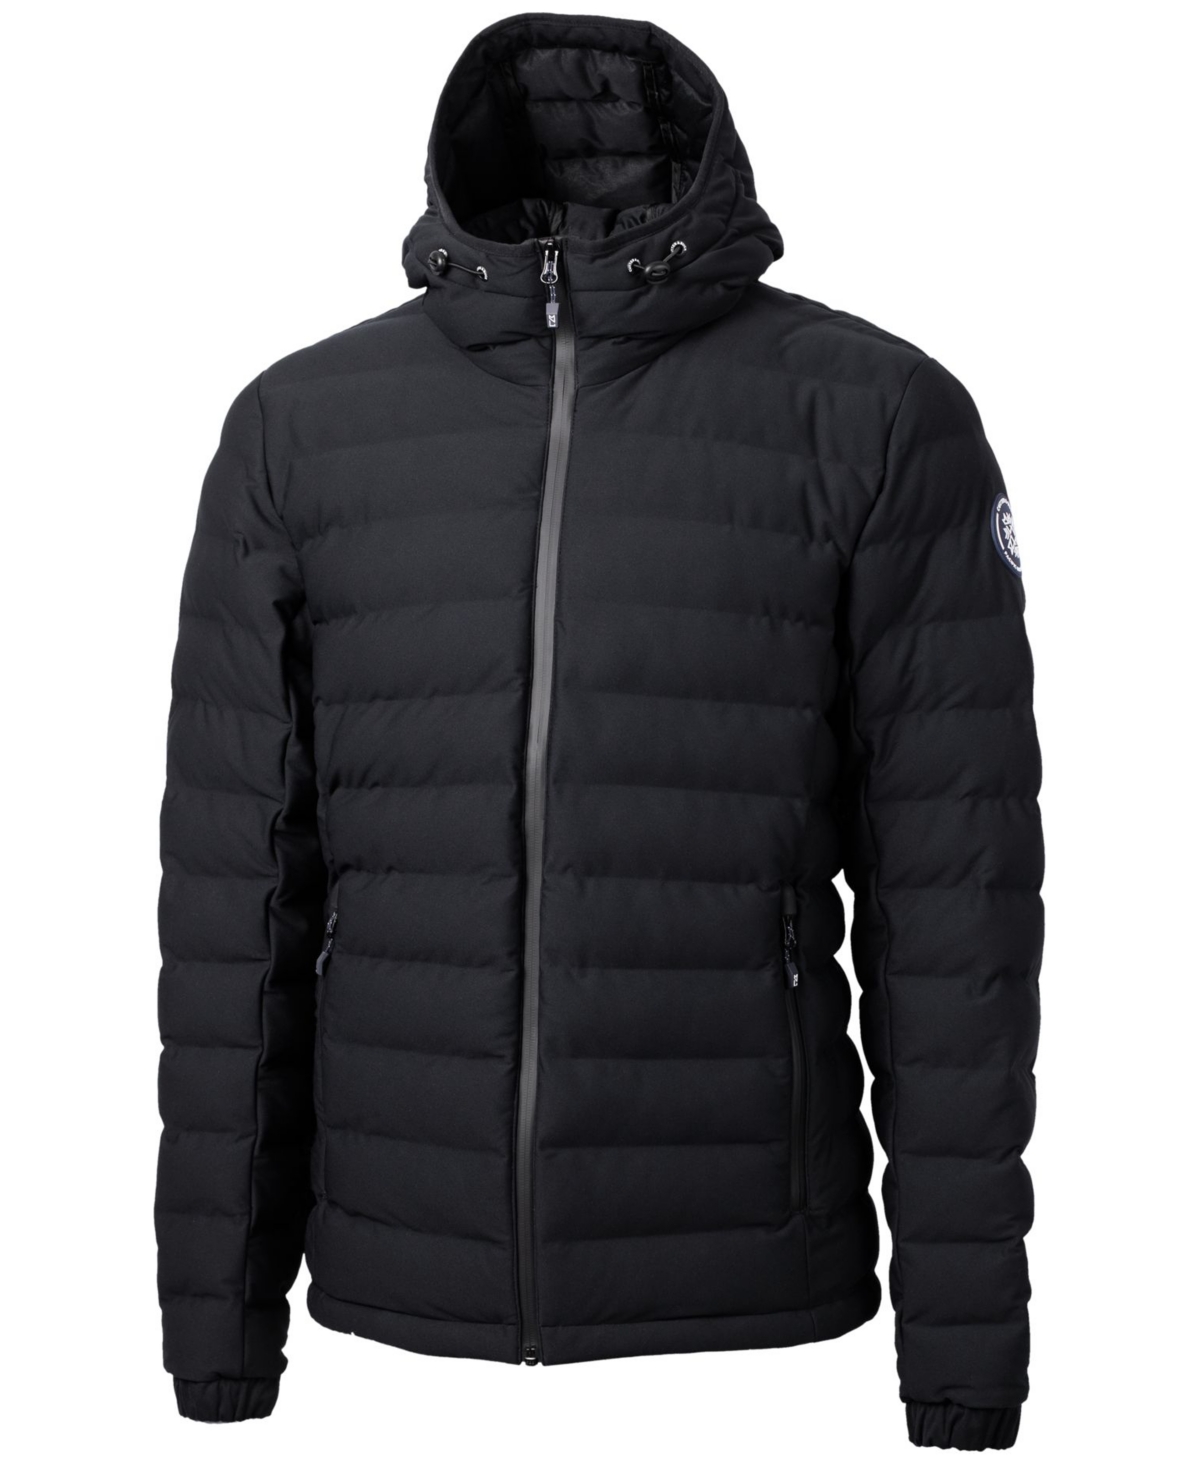 Mission Ridge Repreve Eco Insulated Men's Big & Tall Puffer Jacket - Navy Blue